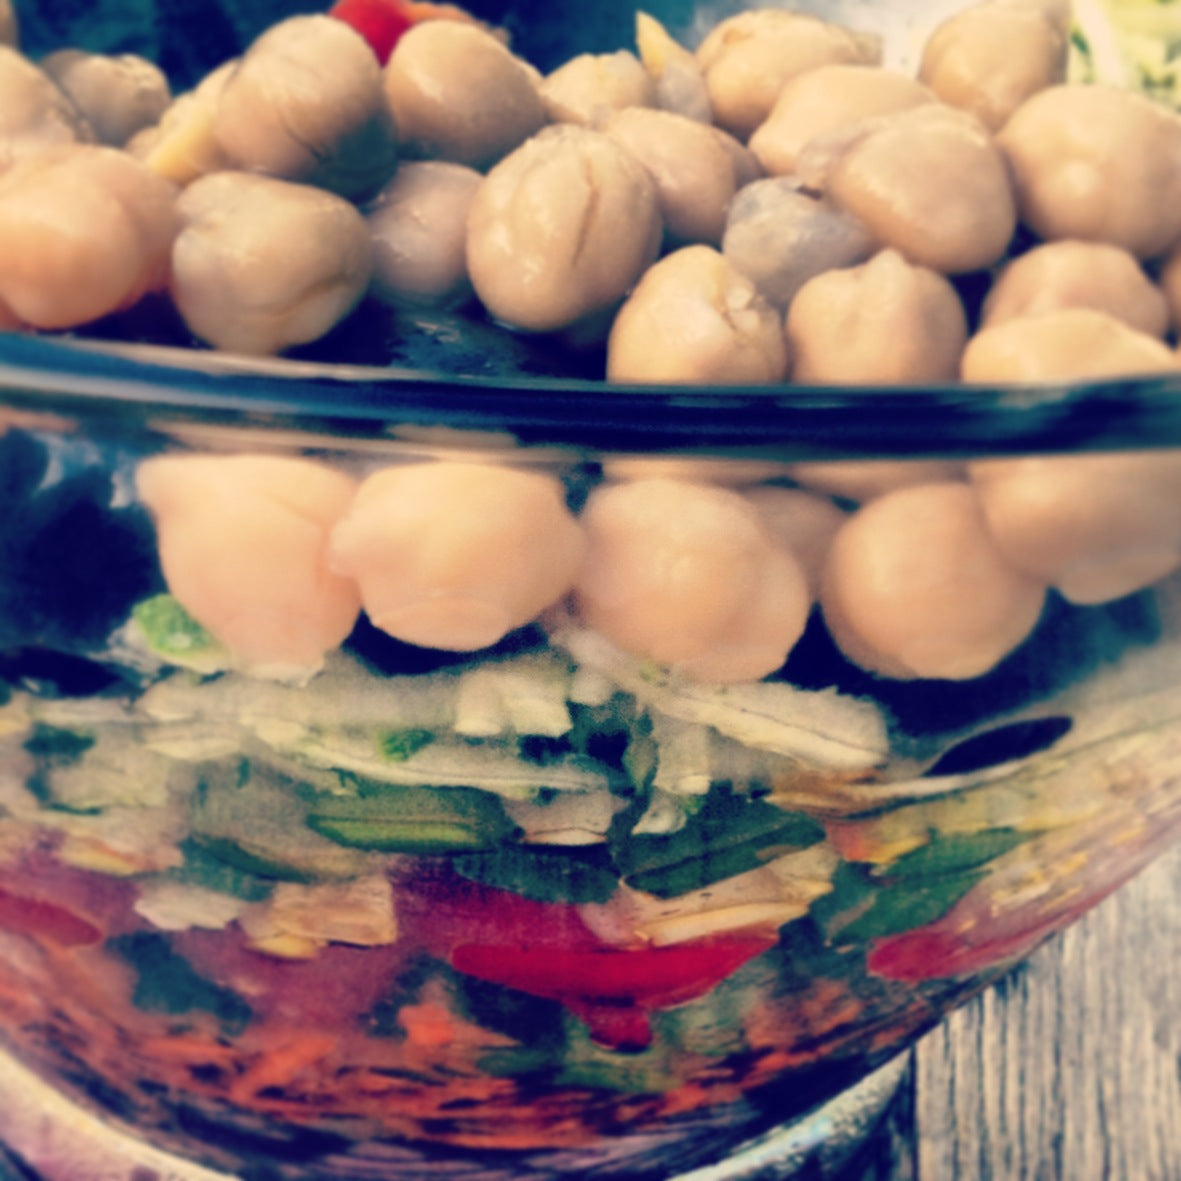 Vibrant Marinated Vegetable Salad Recipe with Layers of Flavor